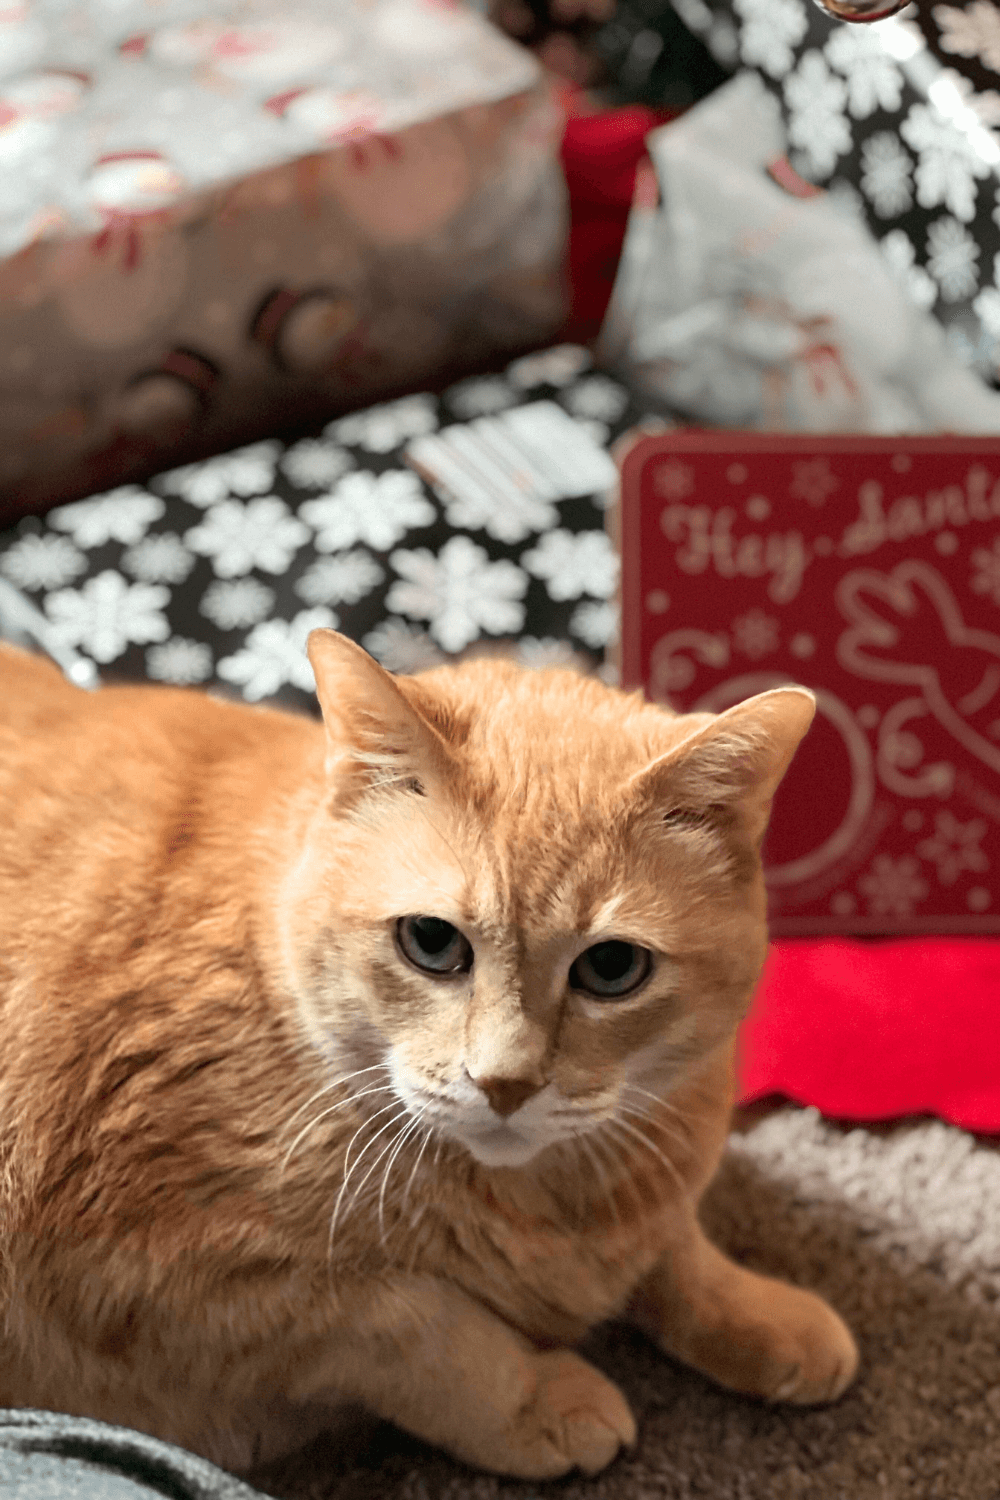 Navy veteran charmed by old tabby cat with unexpected personality